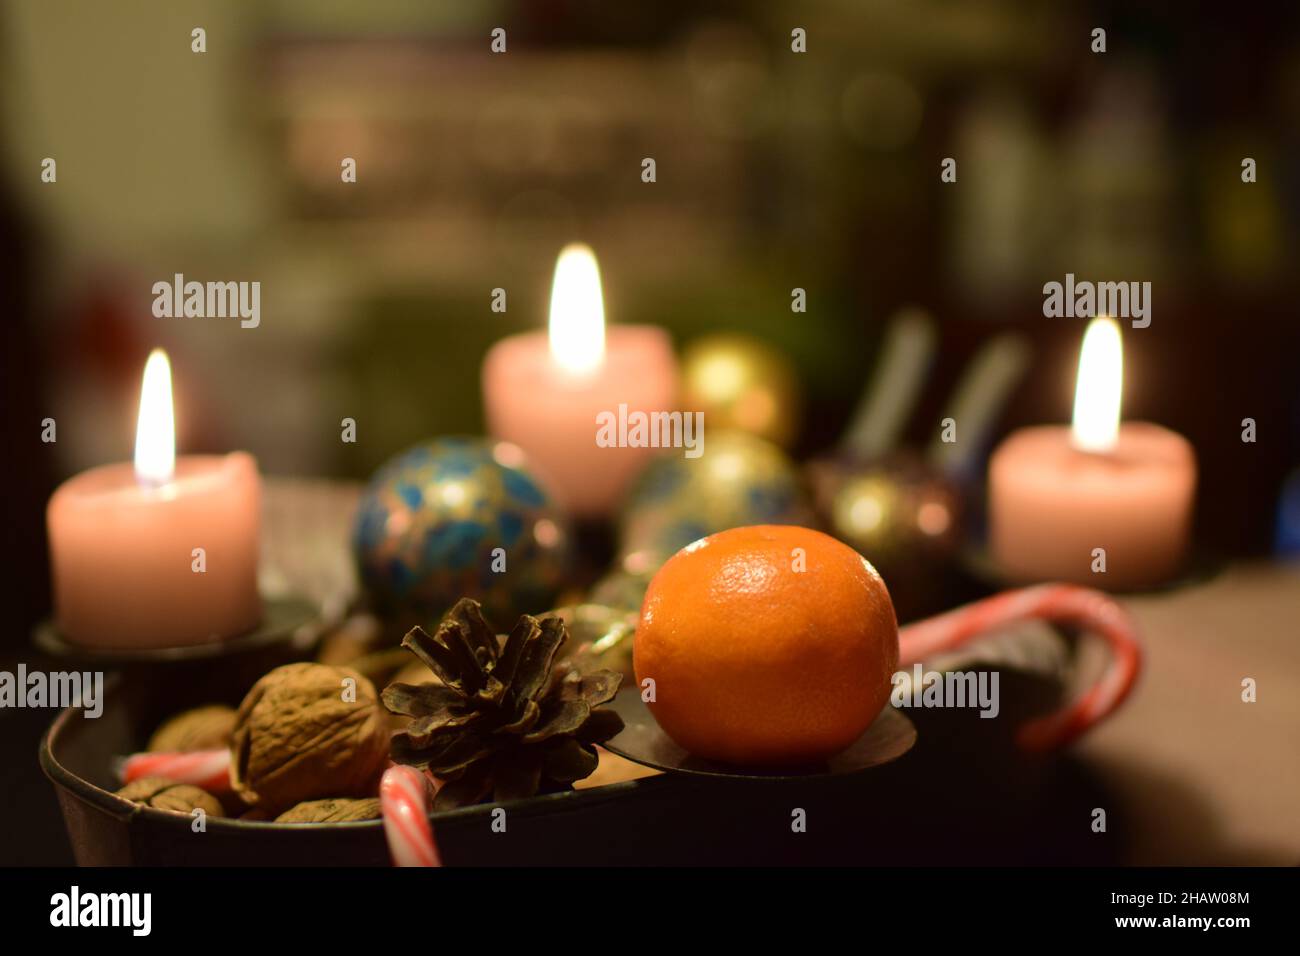 Three burning candles with a manadarin and a pine cone as christmas decoration Stock Photo